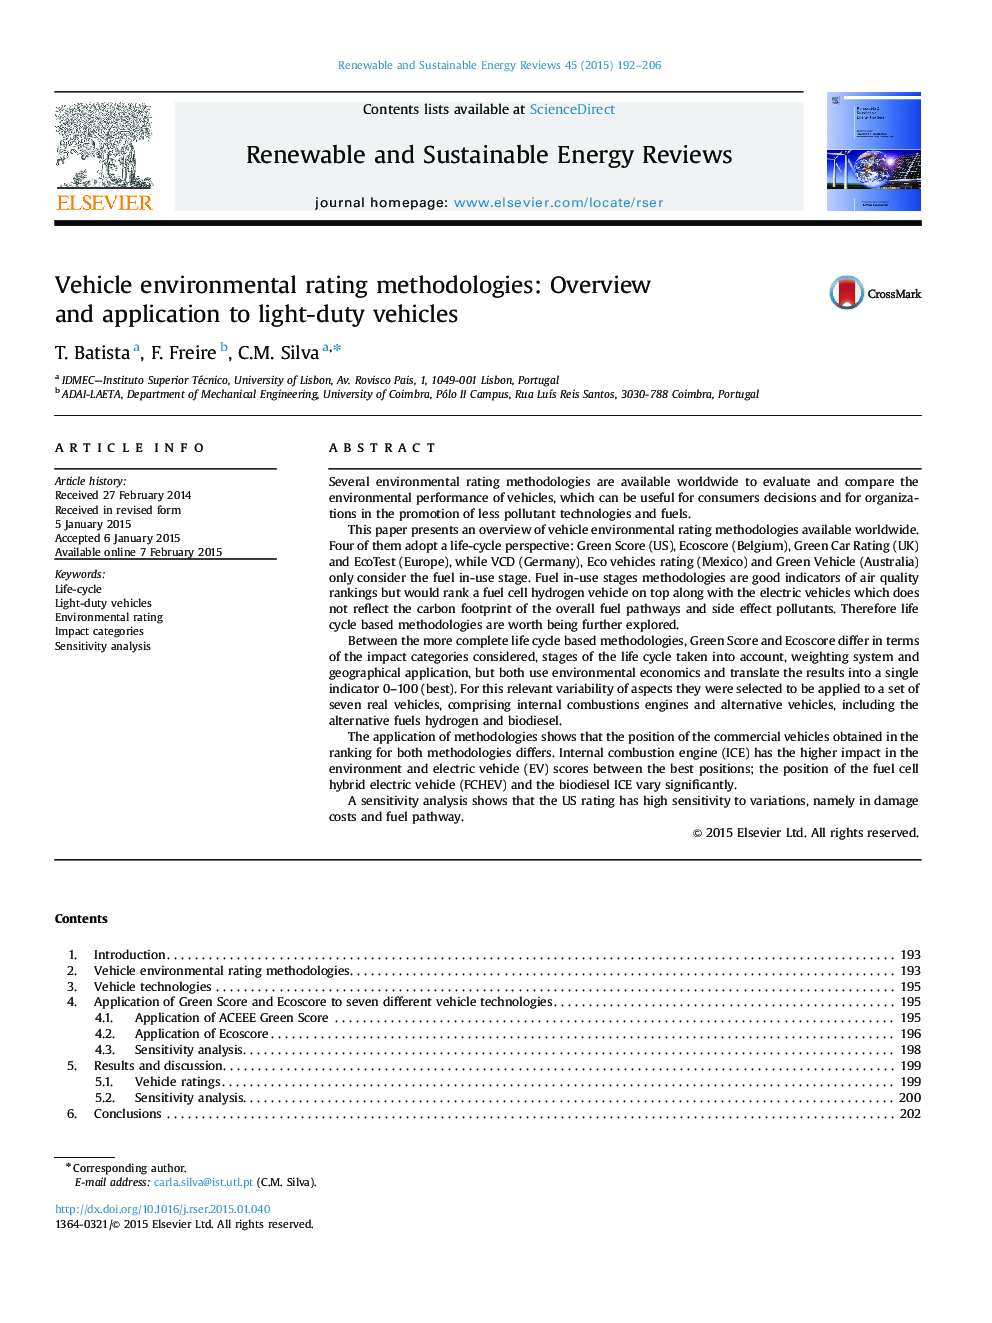 Vehicle environmental rating methodologies: Overview and application to light-duty vehicles